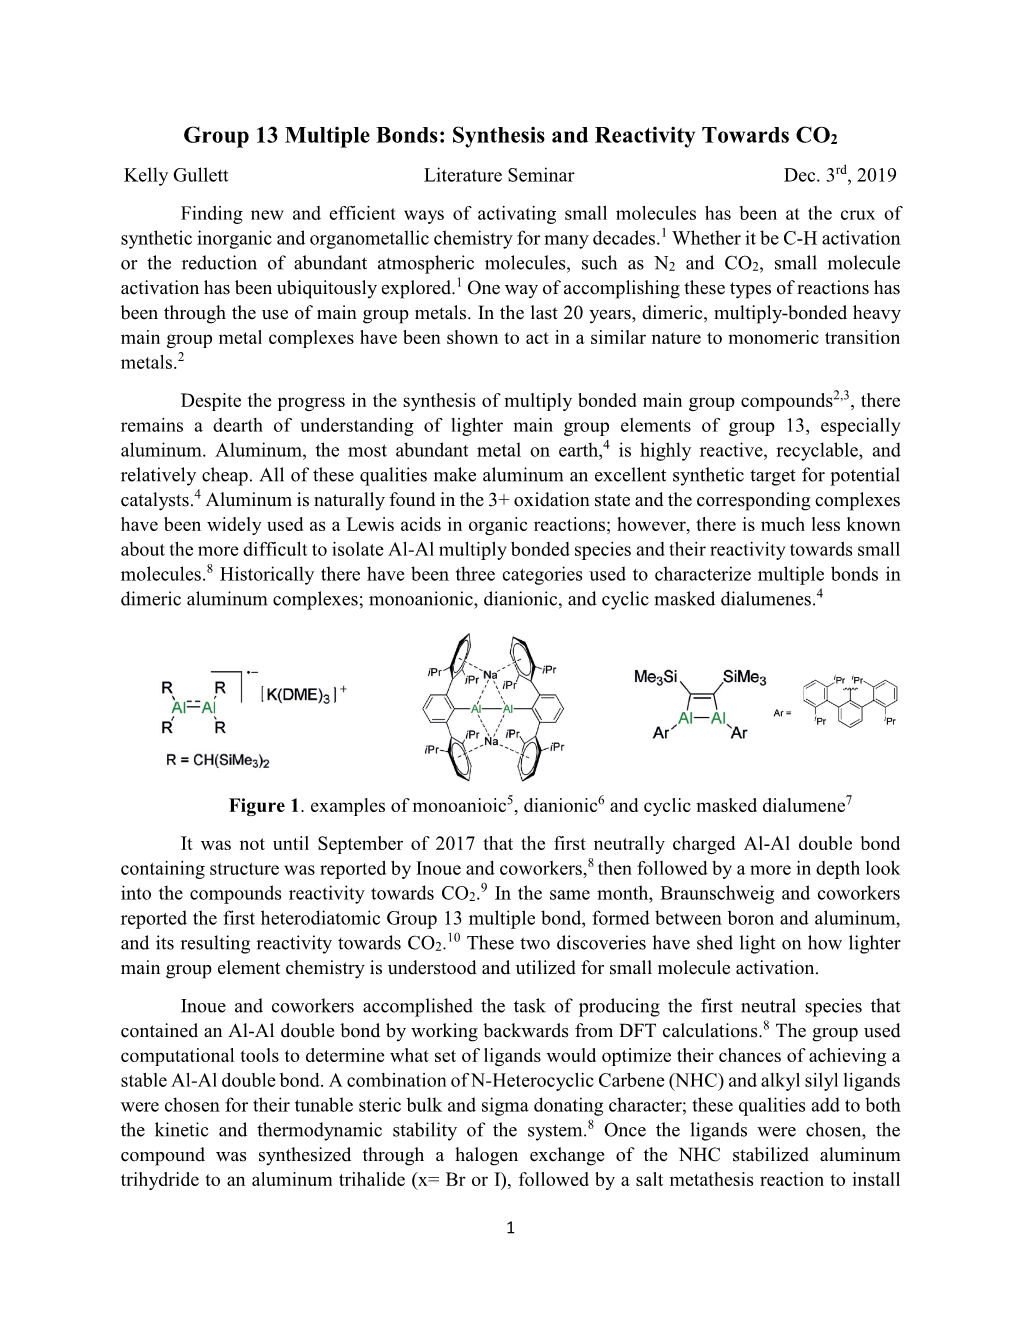 Group 13 Multiple Bonds: Synthesis and Reactivity Towards CO2 Kelly Gullett Literature Seminar Dec